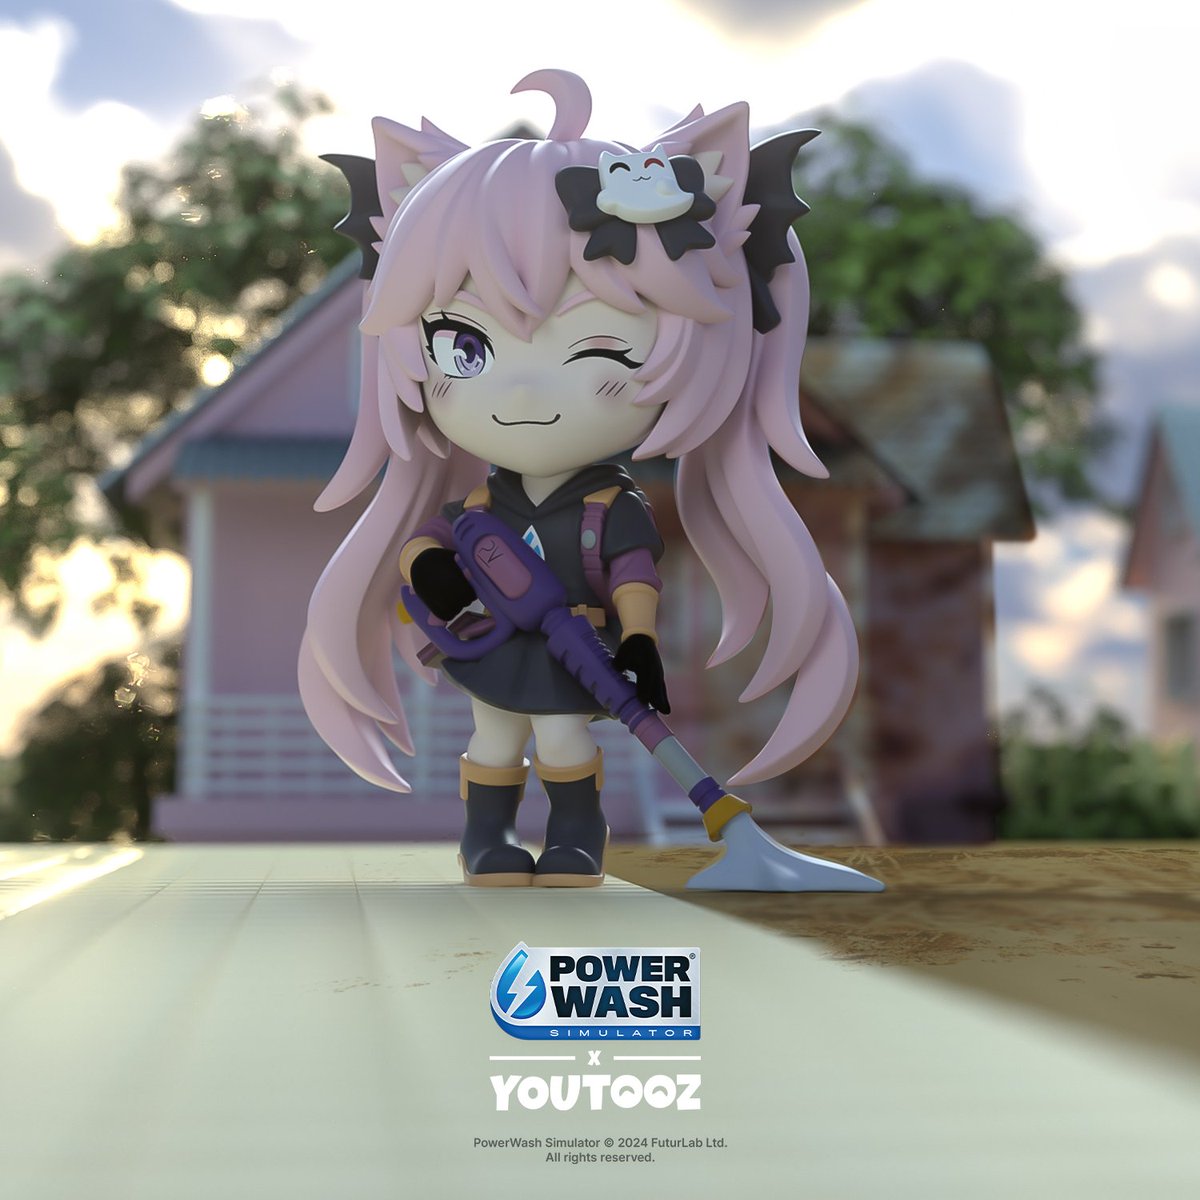 FILTH AND GRIME BEWARE POWERWASH PINK CAT IS HERE💦 Very excited to announce that my official @PowerWashSim x @youtooz figure is dropping on 05/21! 💜 She will spray your shelves clean & definitely not get distracted and go on a 30 minute tangent about something 🫡